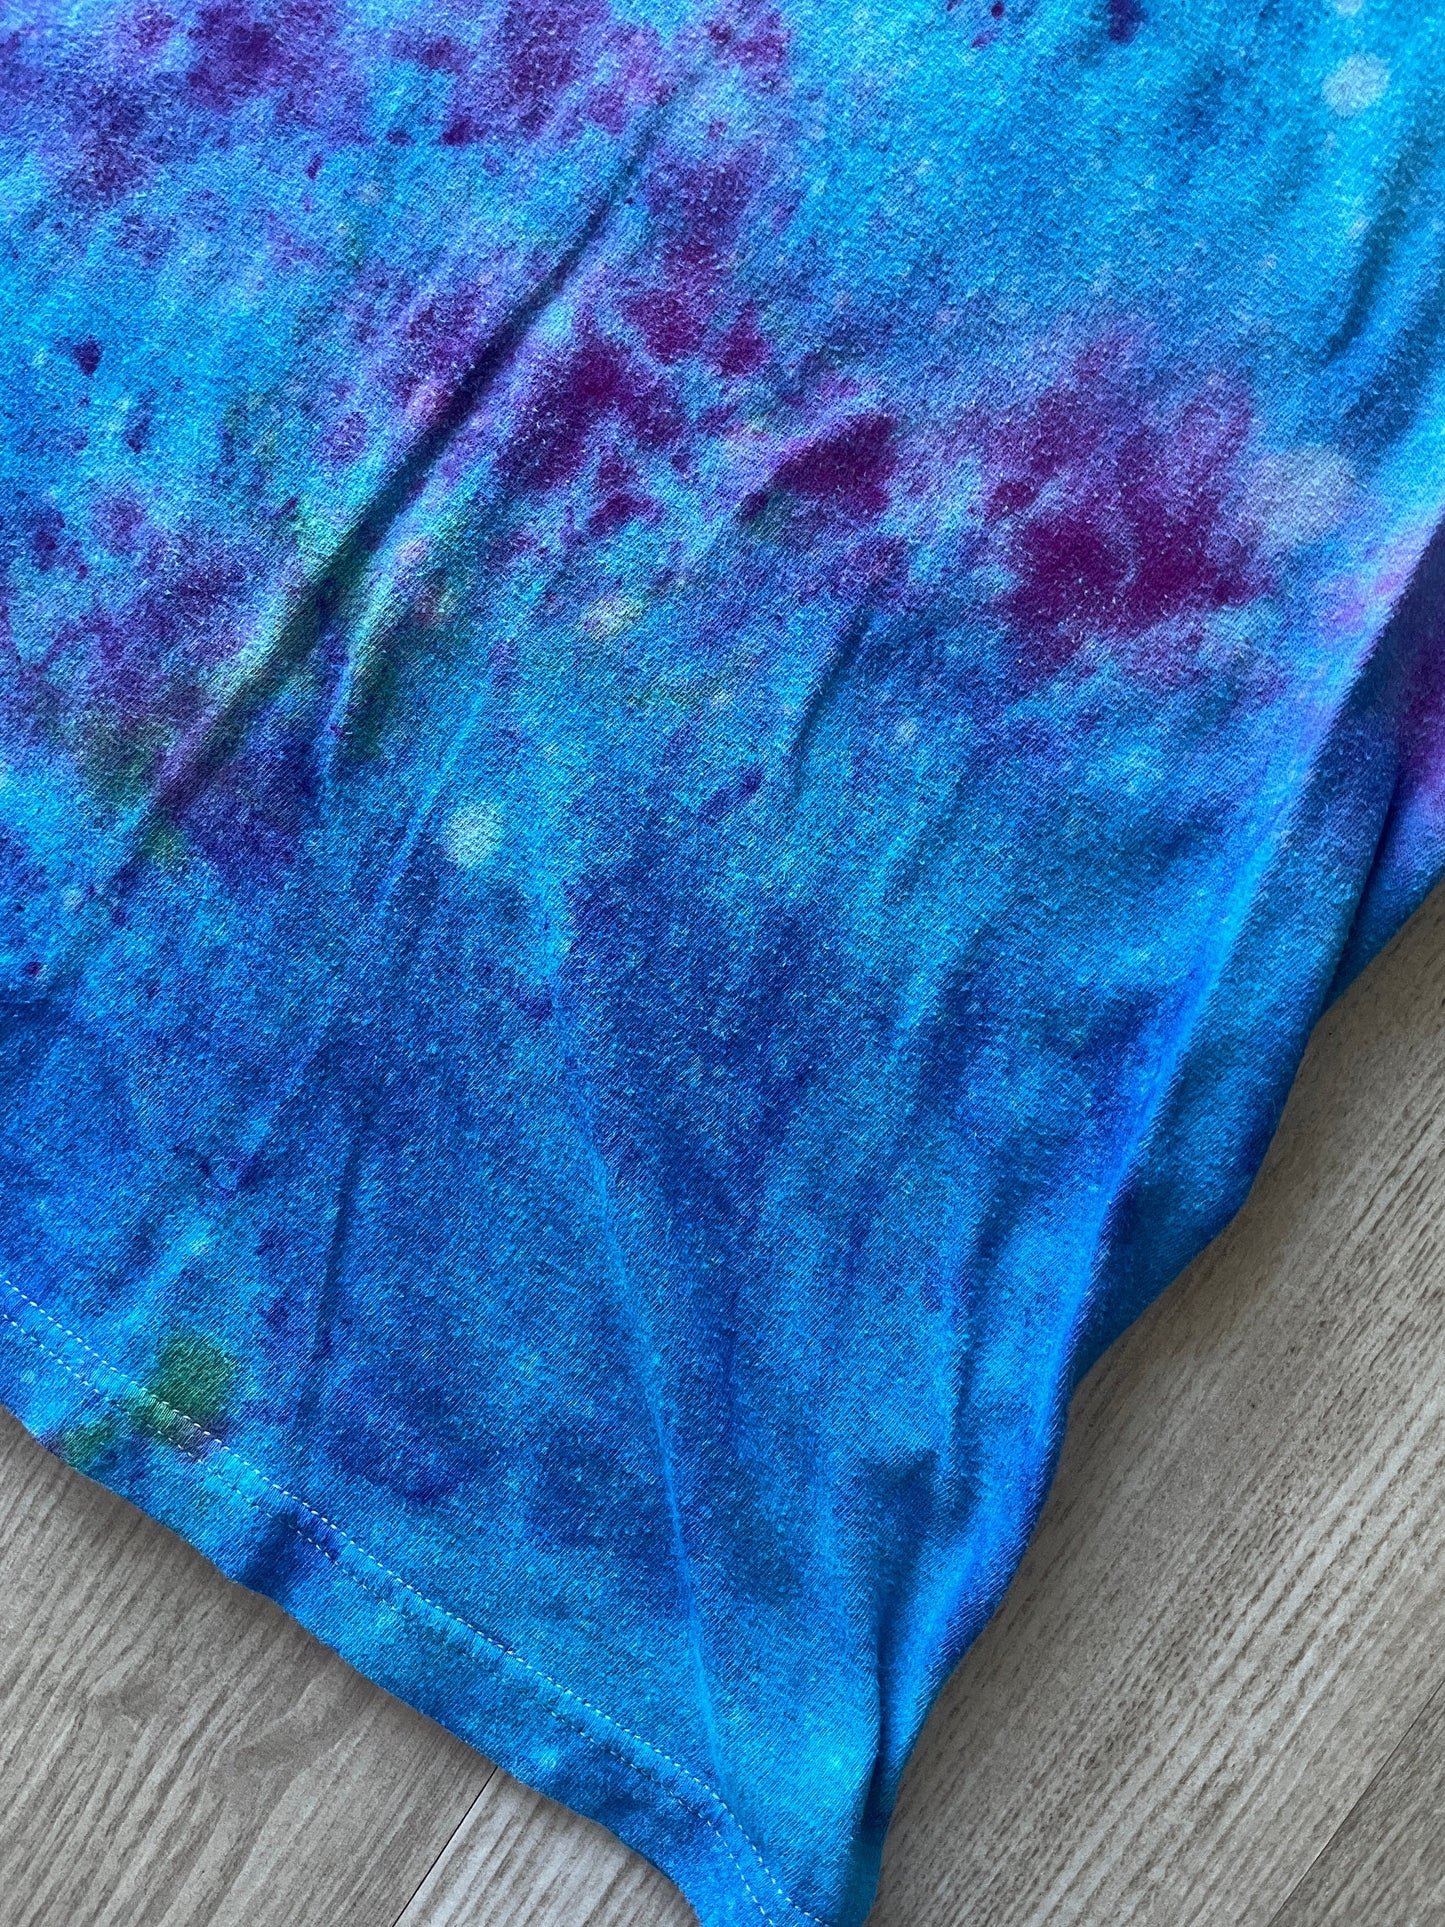 LARGE Men's Fox Racing Handmade Galaxy Ice Dye Tie Dye Short Sleeve T-Shirt | One-Of-a-Kind Upcycled Blue and Pink Ice Dye Crumpled Top